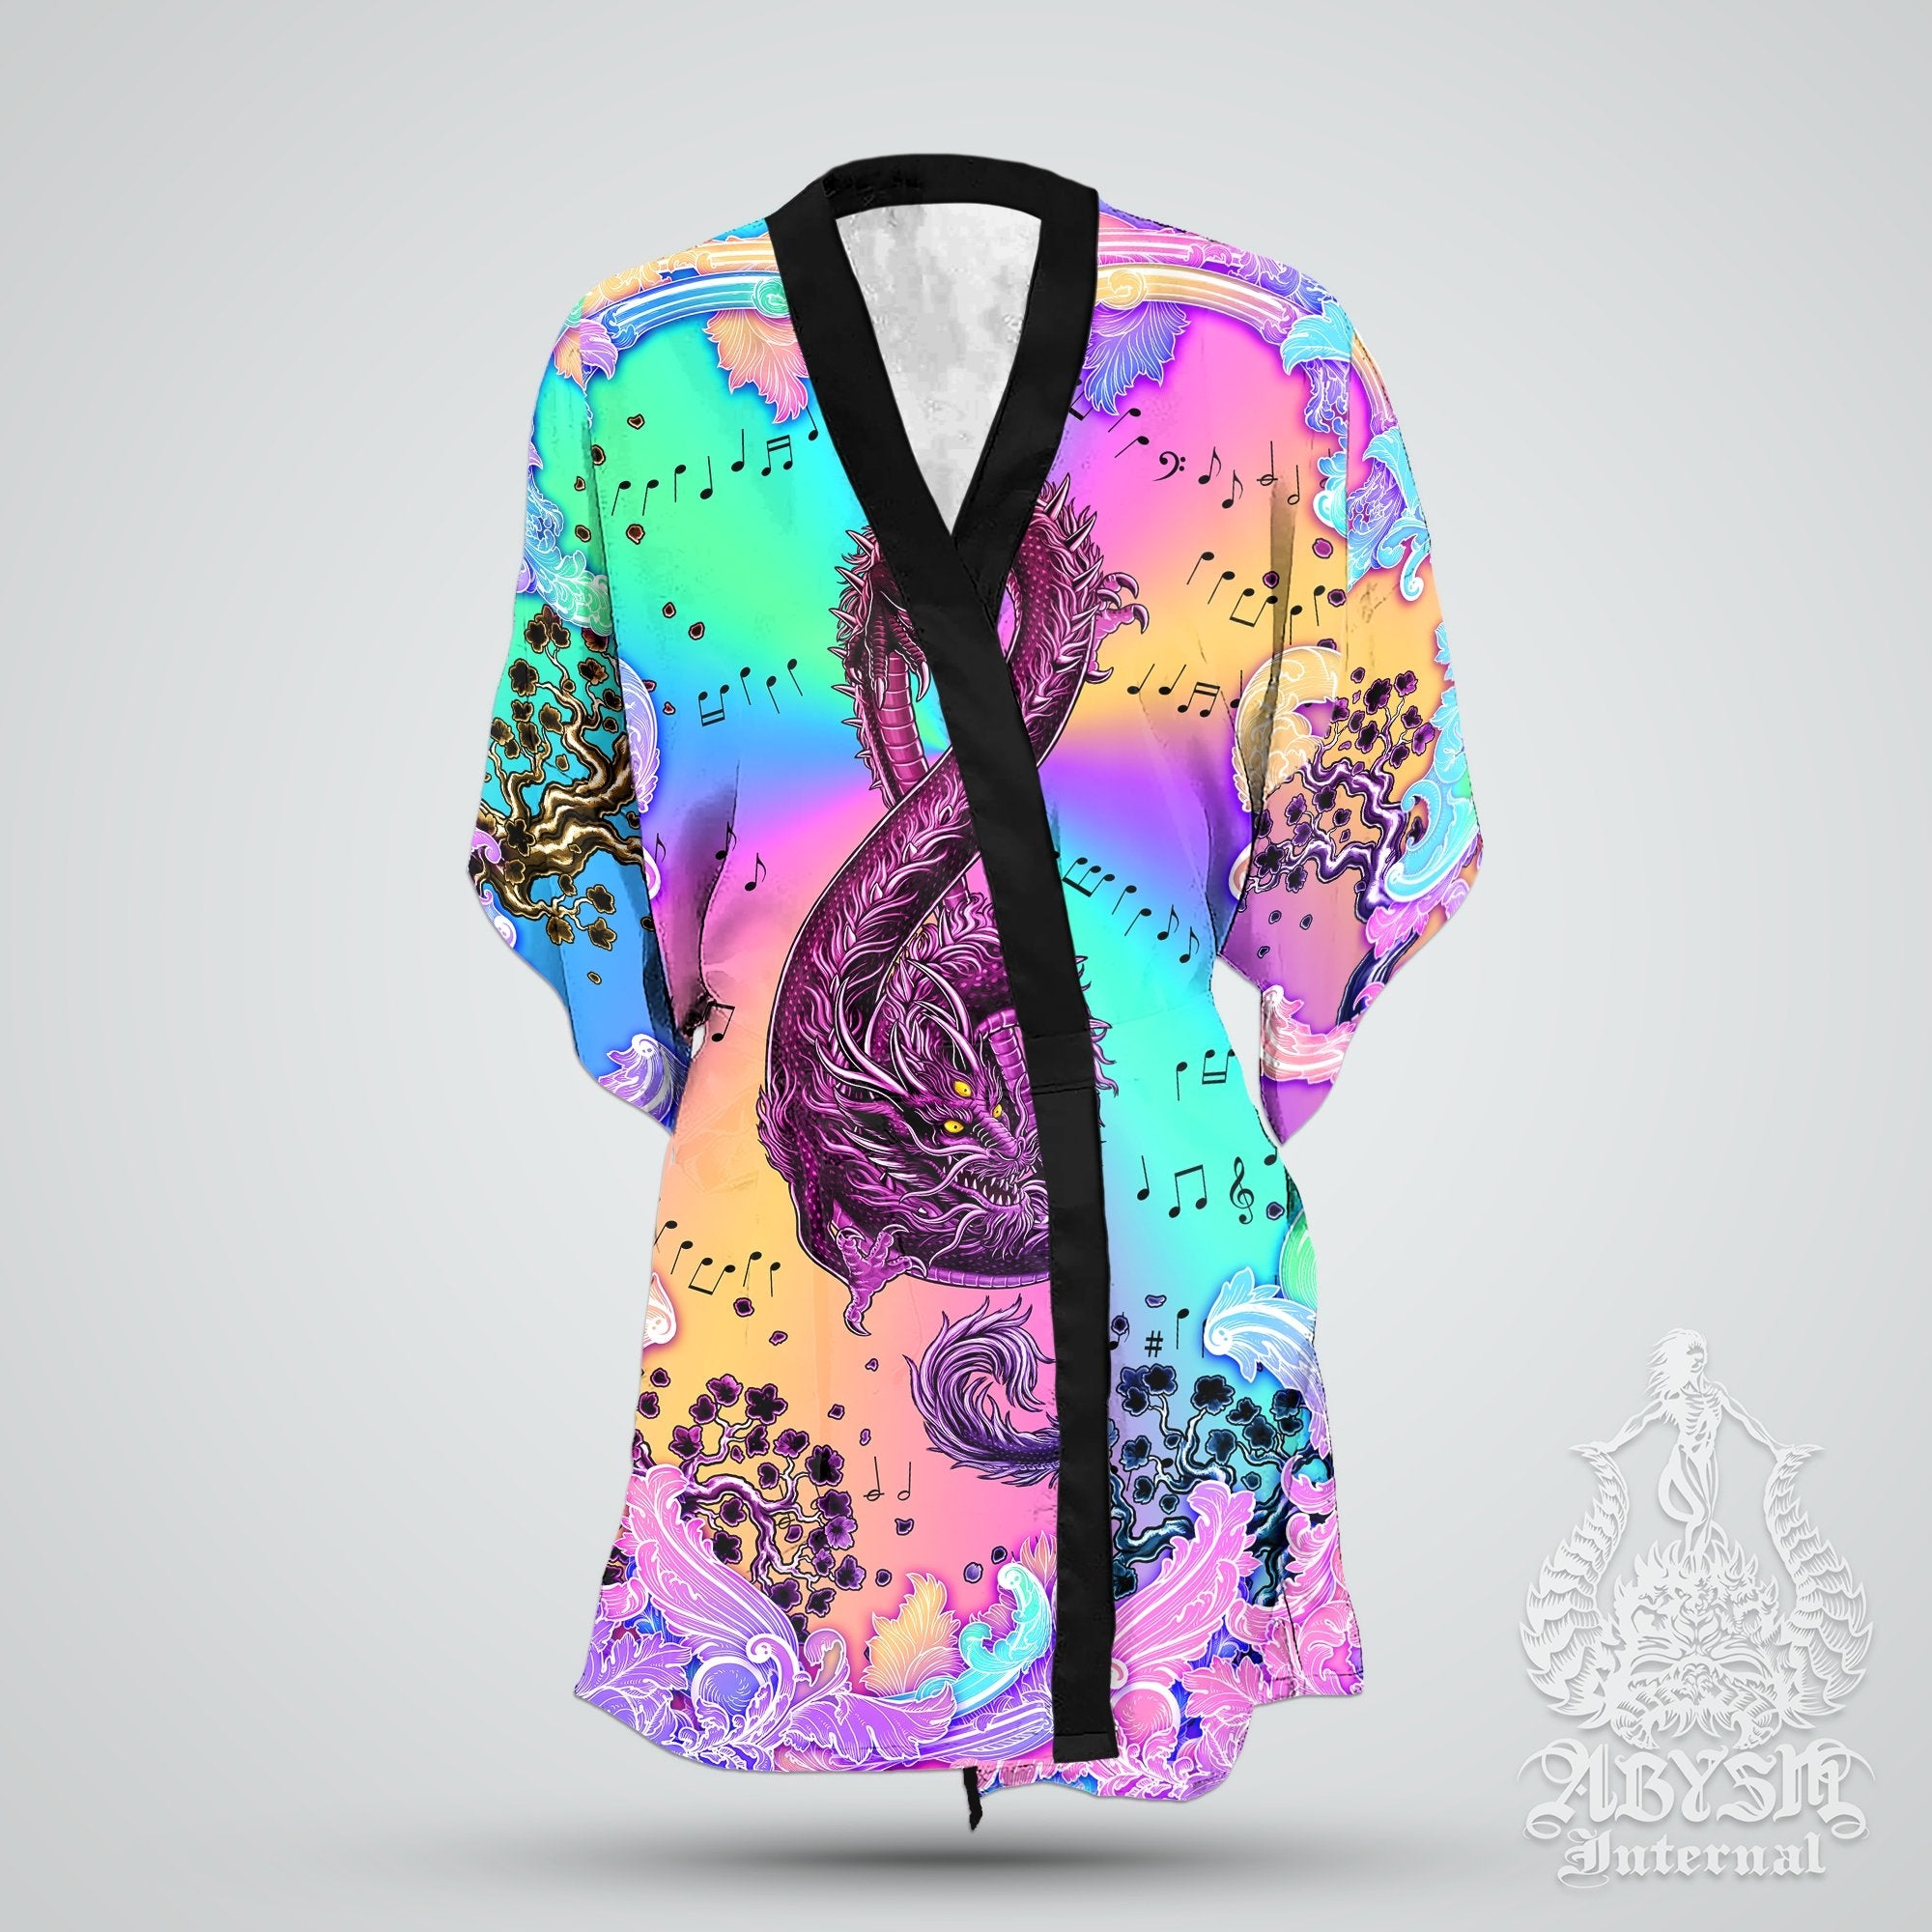 Music Cover Up, Beach Rave Outfit, Party Kimono, Summer Festival Robe, Aesthetic Indie and Alternative Clothing, Unisex - Dragon, Pastel Punk Black II - Abysm Internal